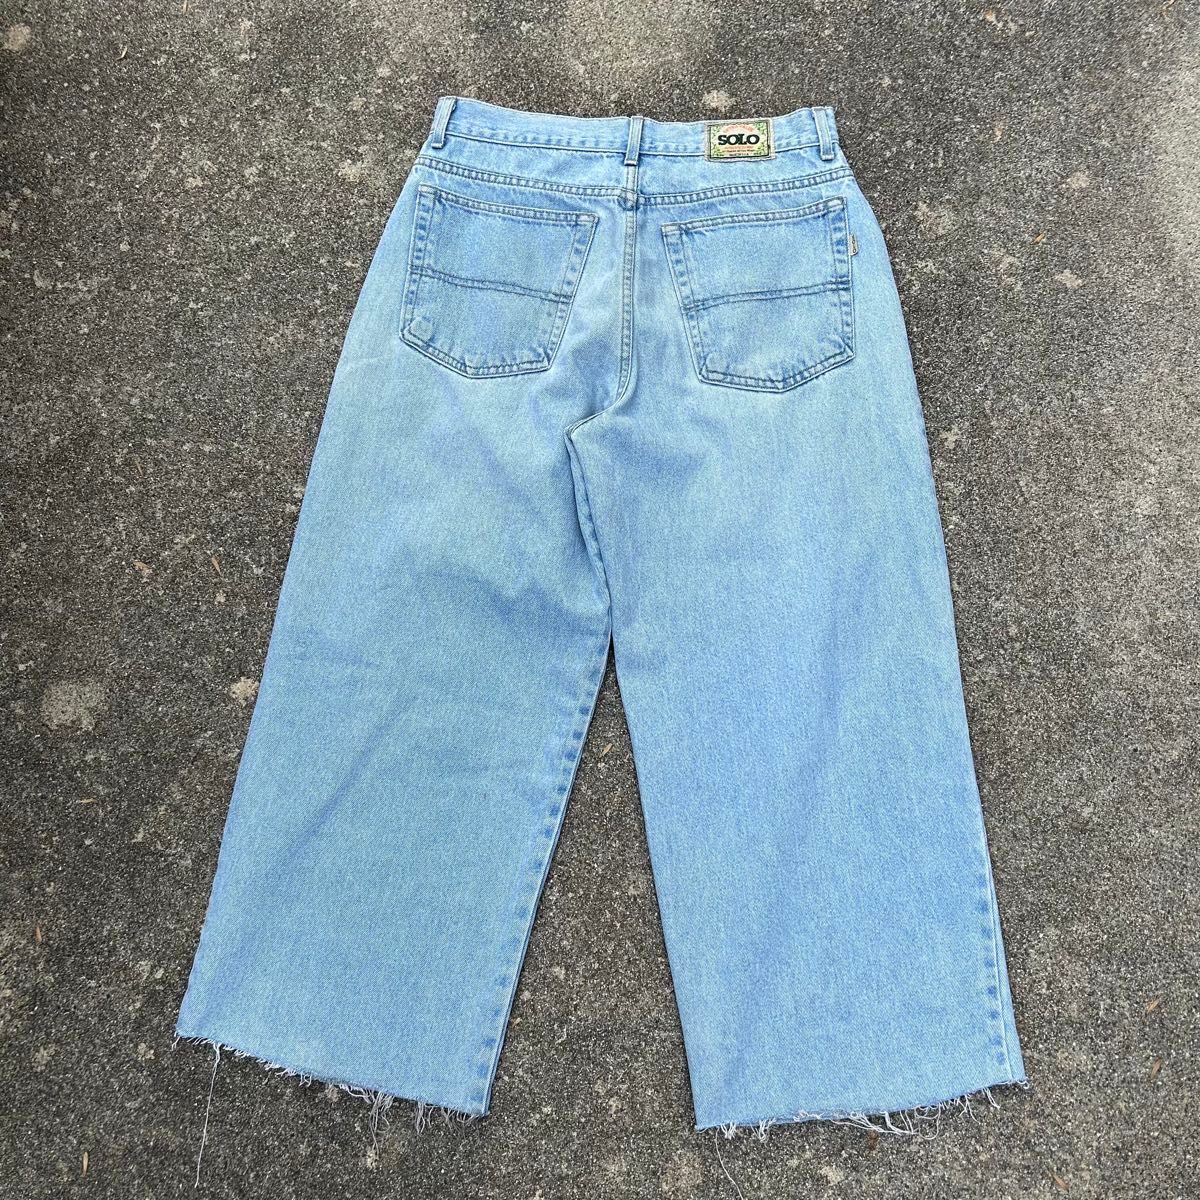 SOLO vintage made in usa used denim